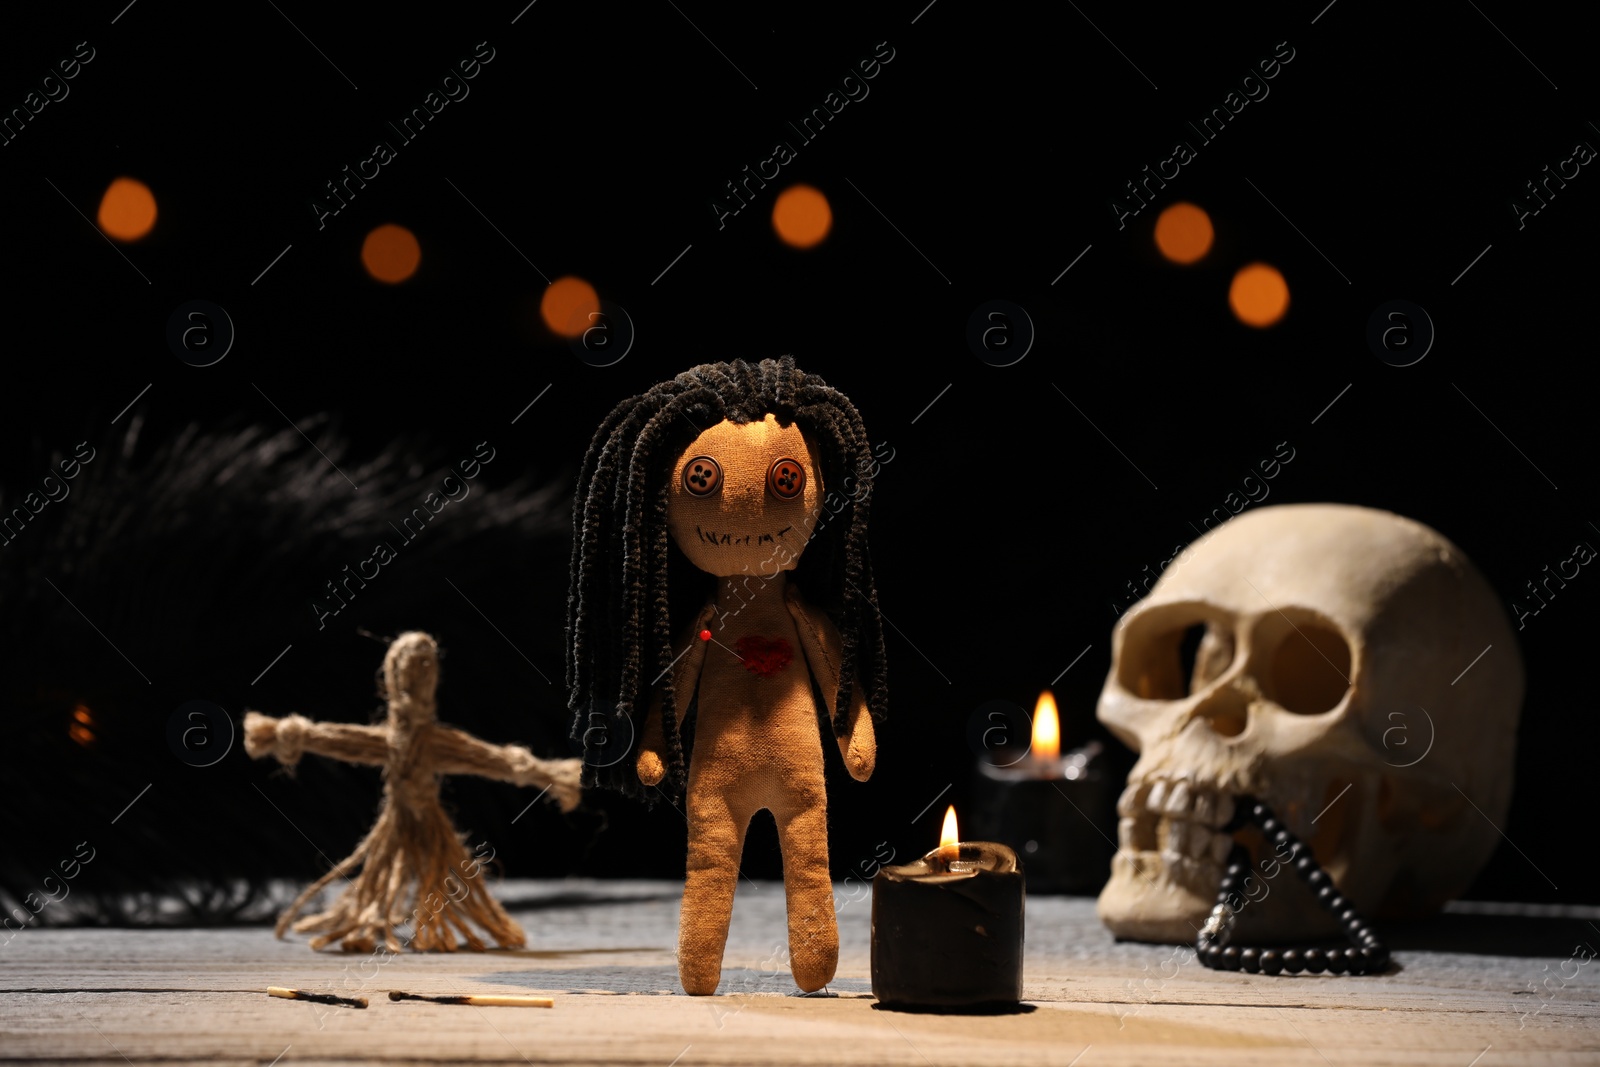 Photo of Female voodoo doll with pin in heart and ceremonial items on wooden table against blurred background